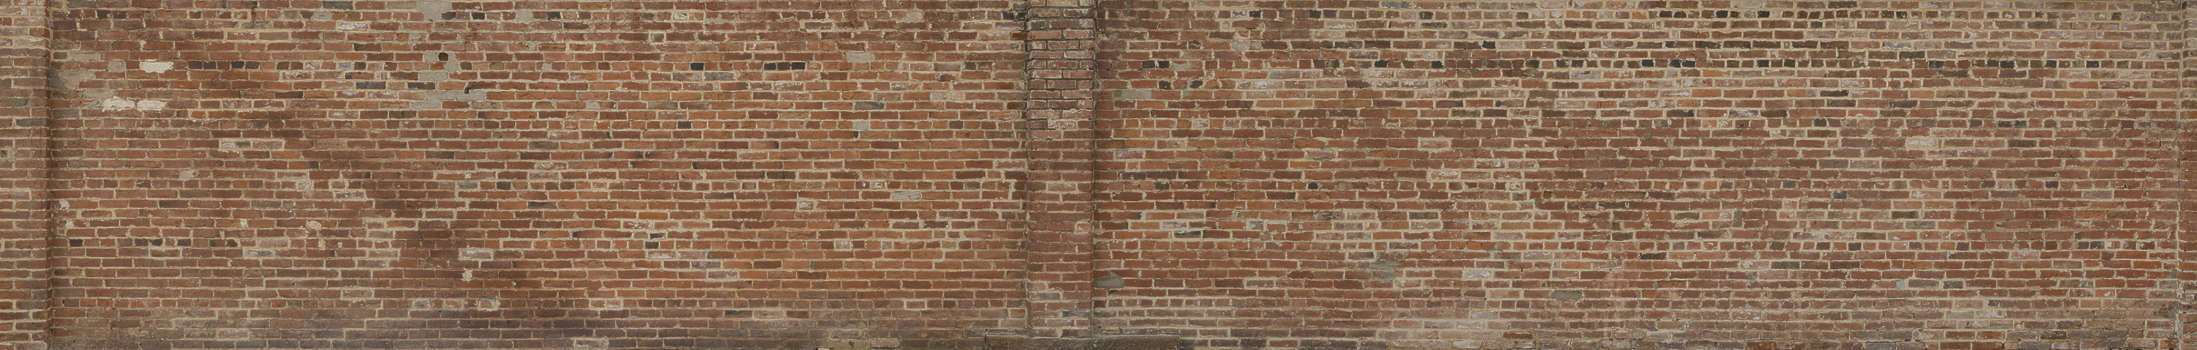 Old Brick Walls Texture Background Images Pictures - old roblox brick texture